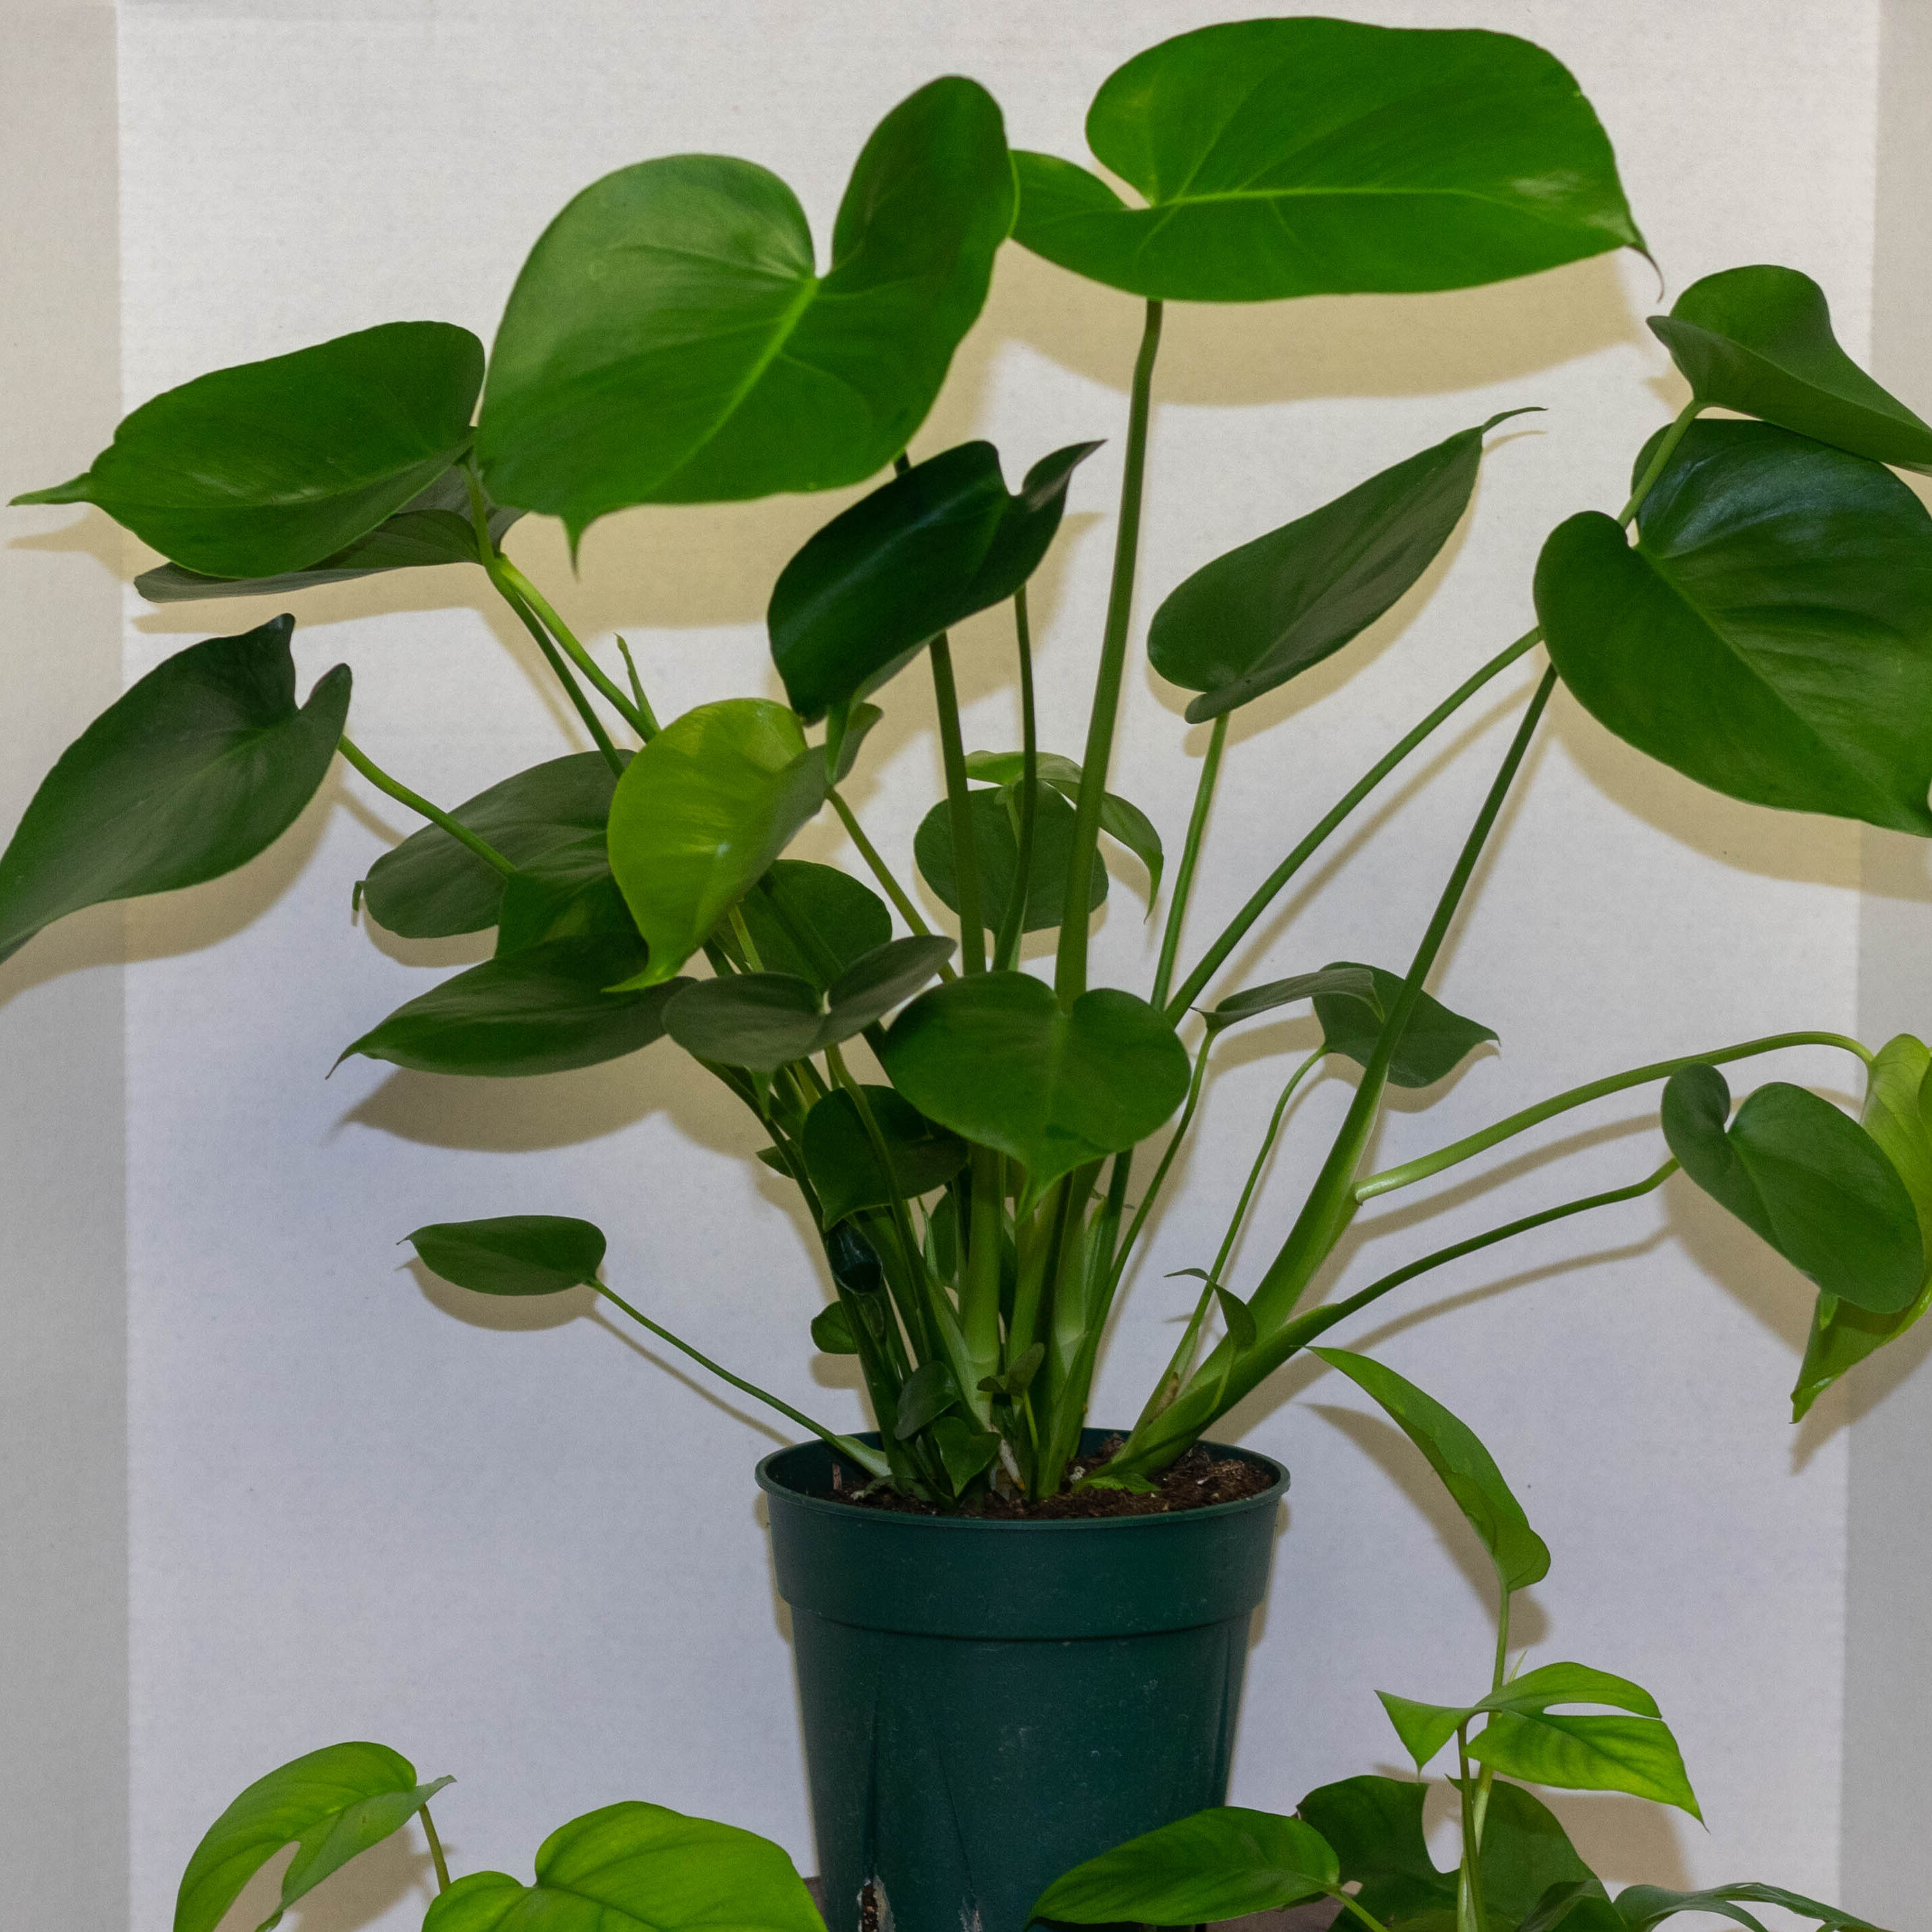 
  			<h4>Trendy Houseplants - Monstera deliciosa and “Monstera Ginny” (Rhaphidophora tetrasperma)</h4>
      		<p>These beautiful houseplants are known for the holes they get in their leaves called fenestrations! These holes and cuts develop naturally over time and give off a very tropical feel. The Rhaphidophora prefers more of a bright indirect light, but the Monstera deliciosa can tolerate bright-low indirect light. The more light you have, the more fenestrations you’ll see! For both of these, let them dry out in between waterings. During their growing season, about once a week, and during the winter, about every two weeks.
      		</p>
      		